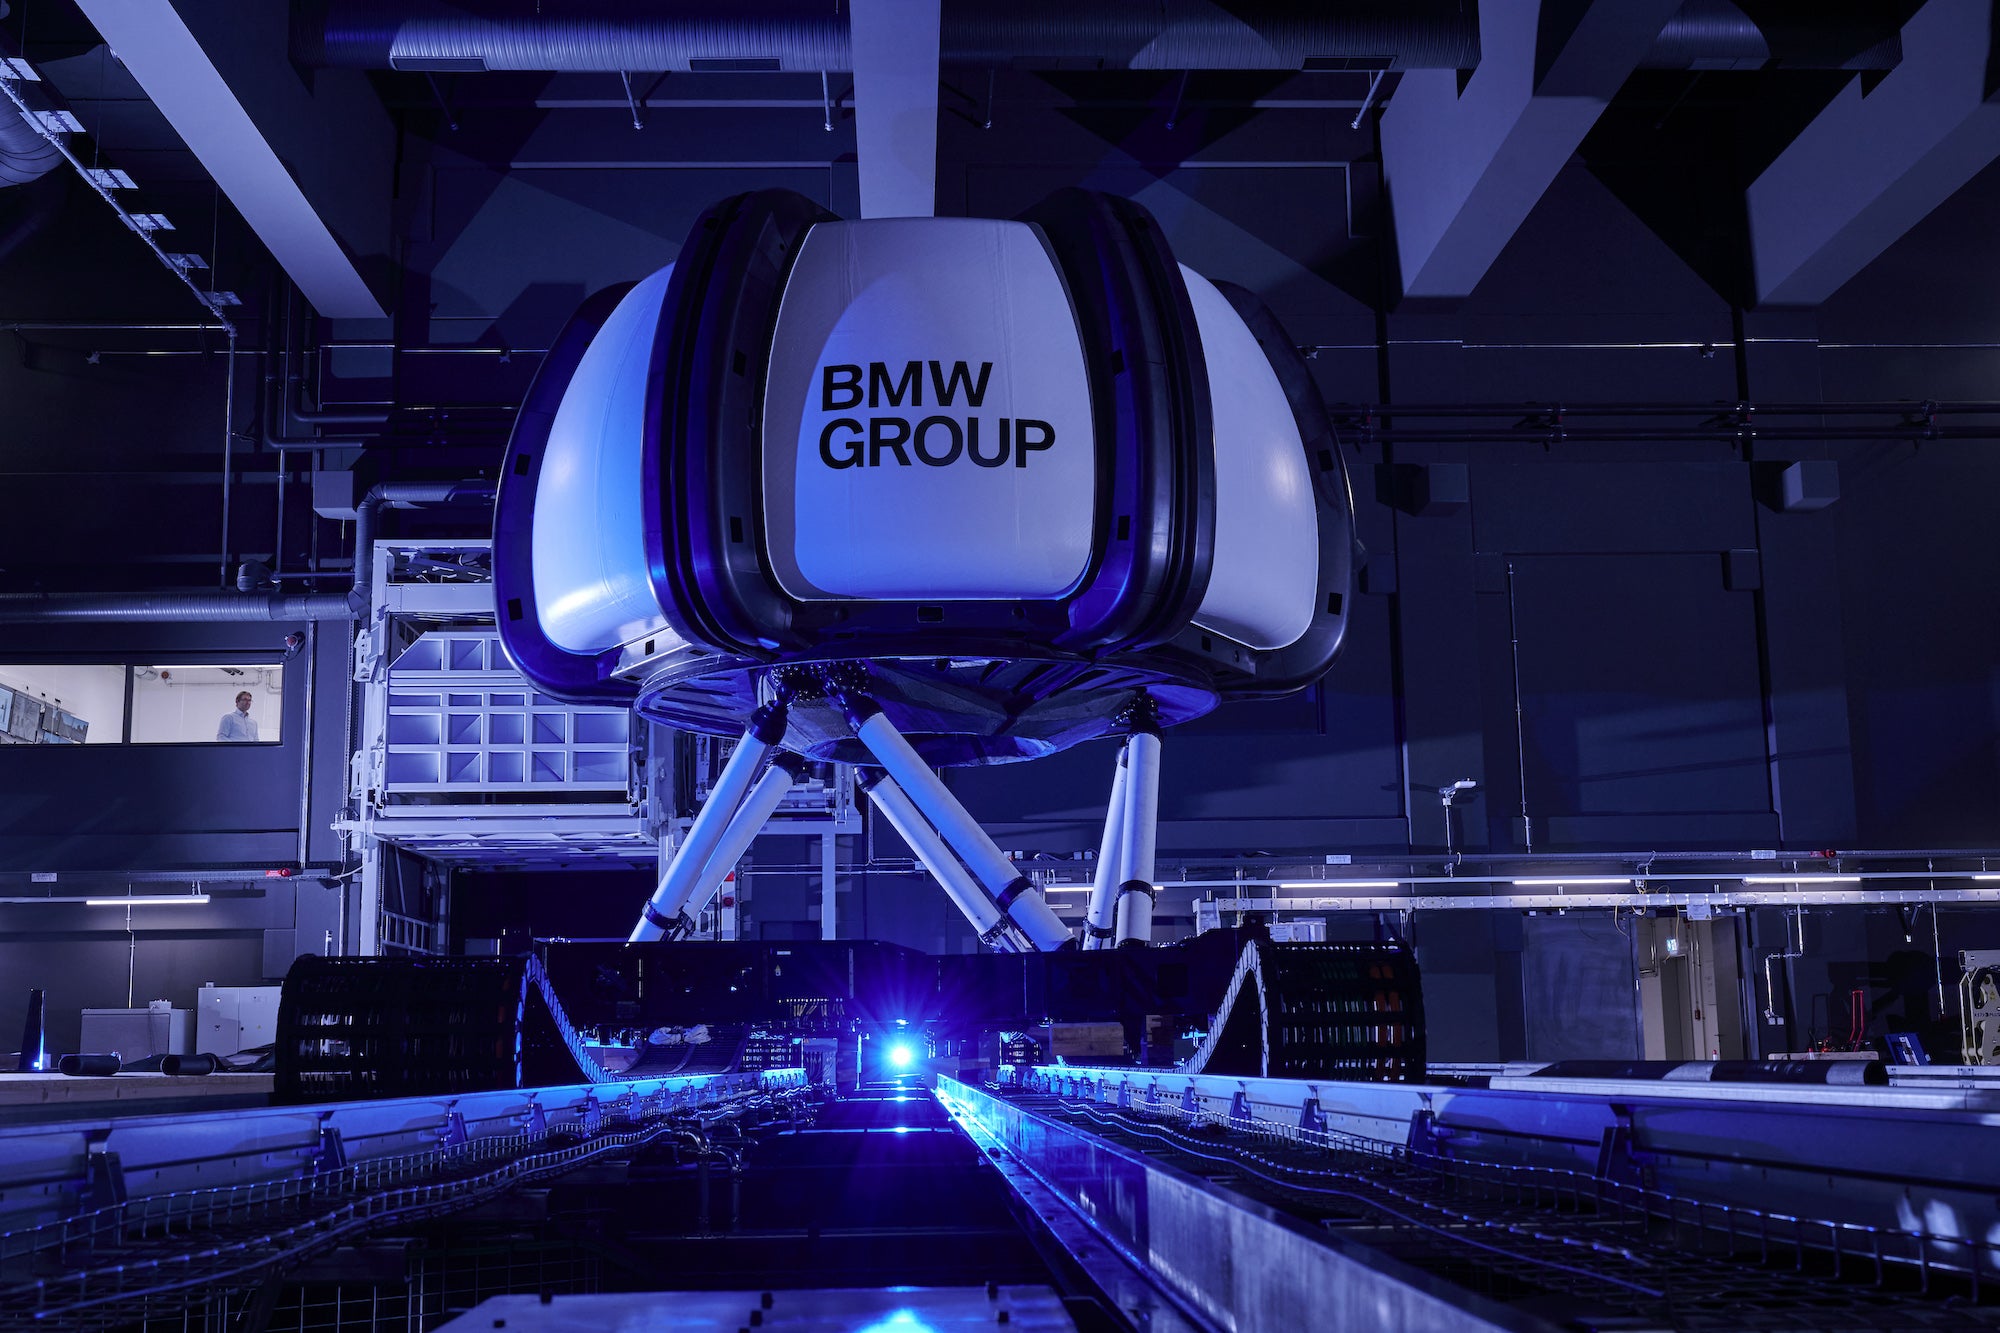 A look inside BMW’s carnival-like simulation center in Germany thumbnail